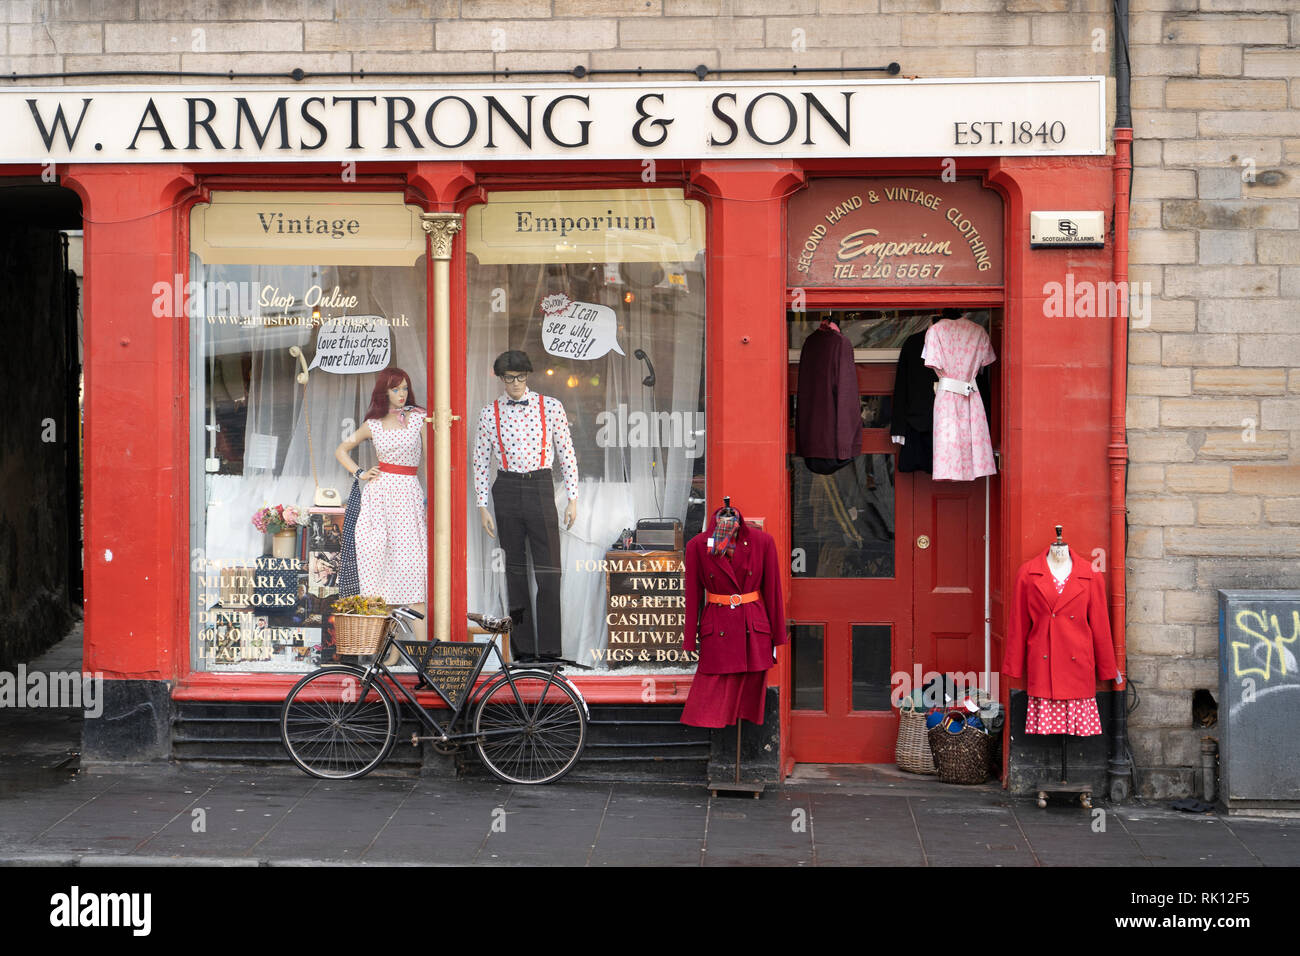 W Armstrong & Son vintage and second hand clothing shop at Grassmarket in Edinburgh Old Town, Scotland, UK Stock Photo